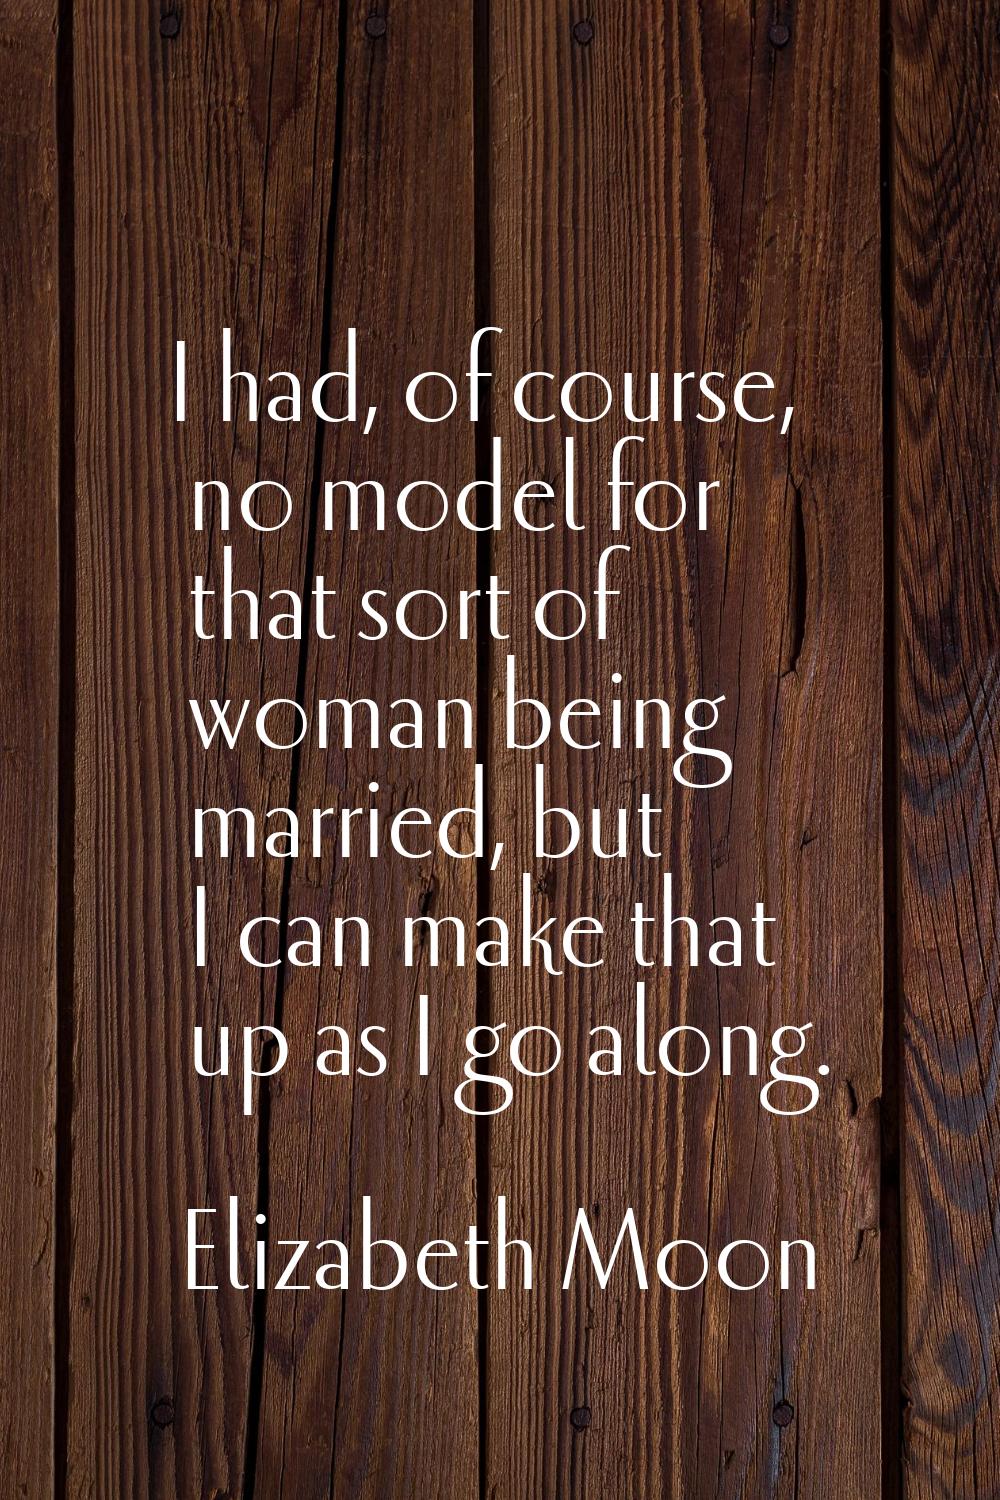 I had, of course, no model for that sort of woman being married, but I can make that up as I go alo